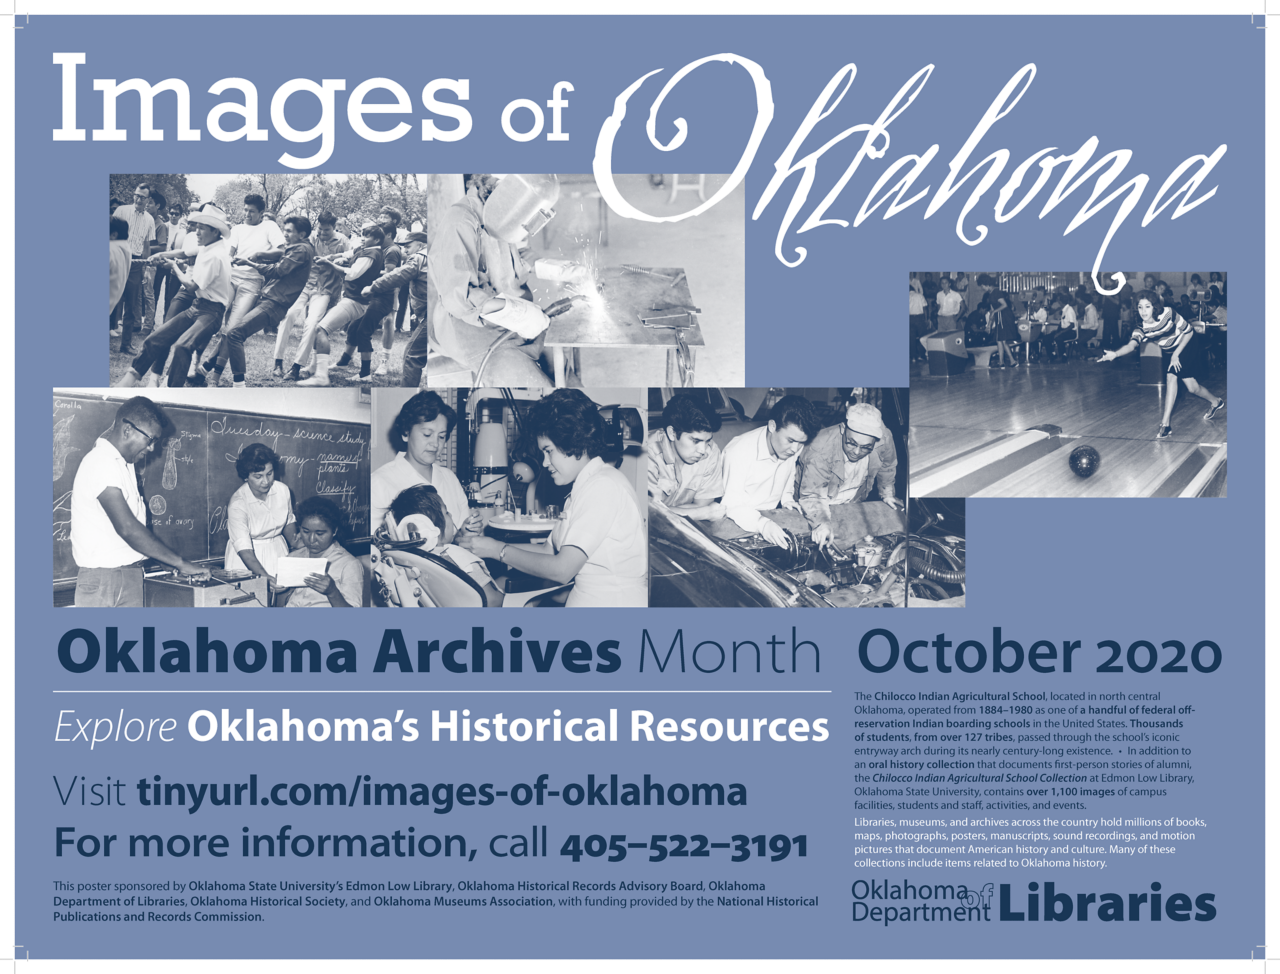 Images of Oklahoma poster featuring Chilocco Indian Agricultural School